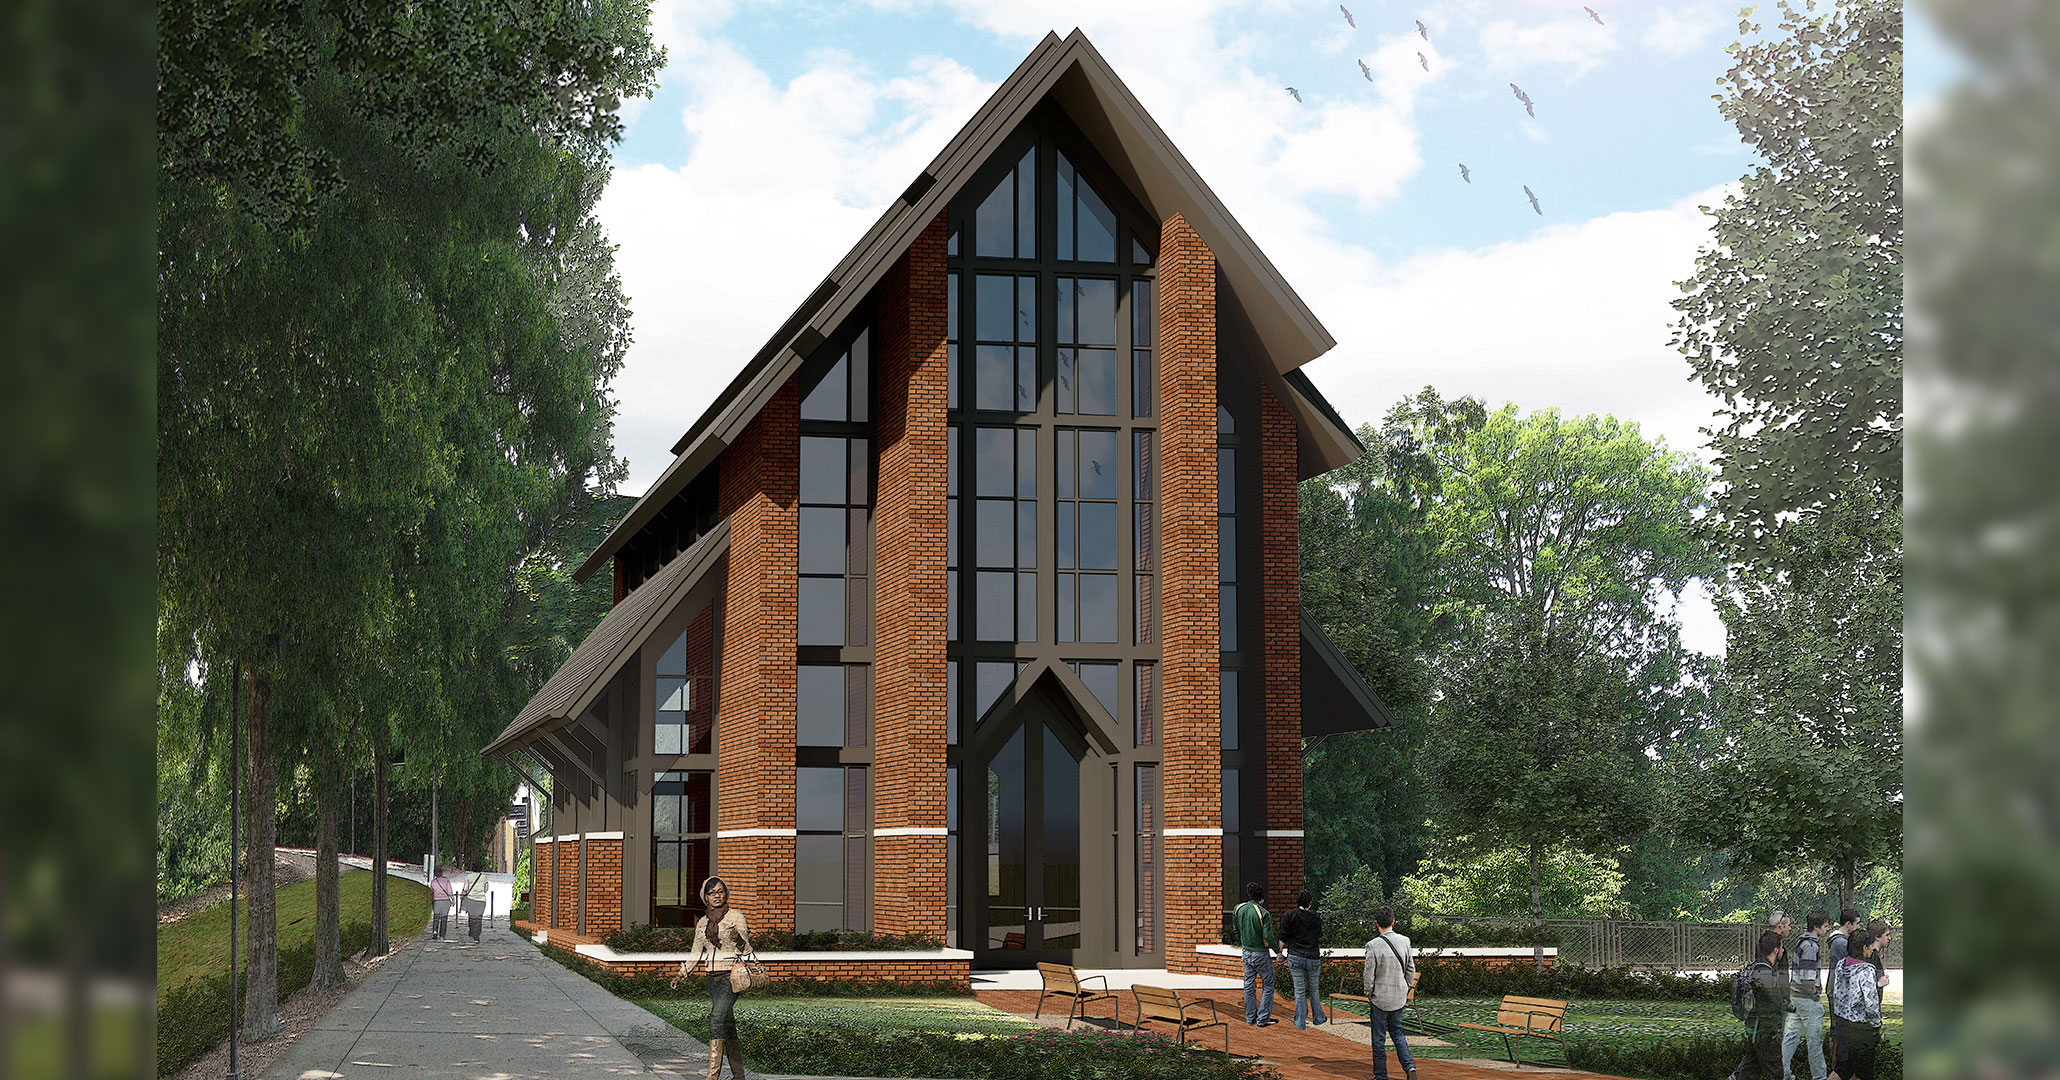 Clemson University is currently working with Boudreaux architects to design and build the Samuel J Cadden Chapel on campus.